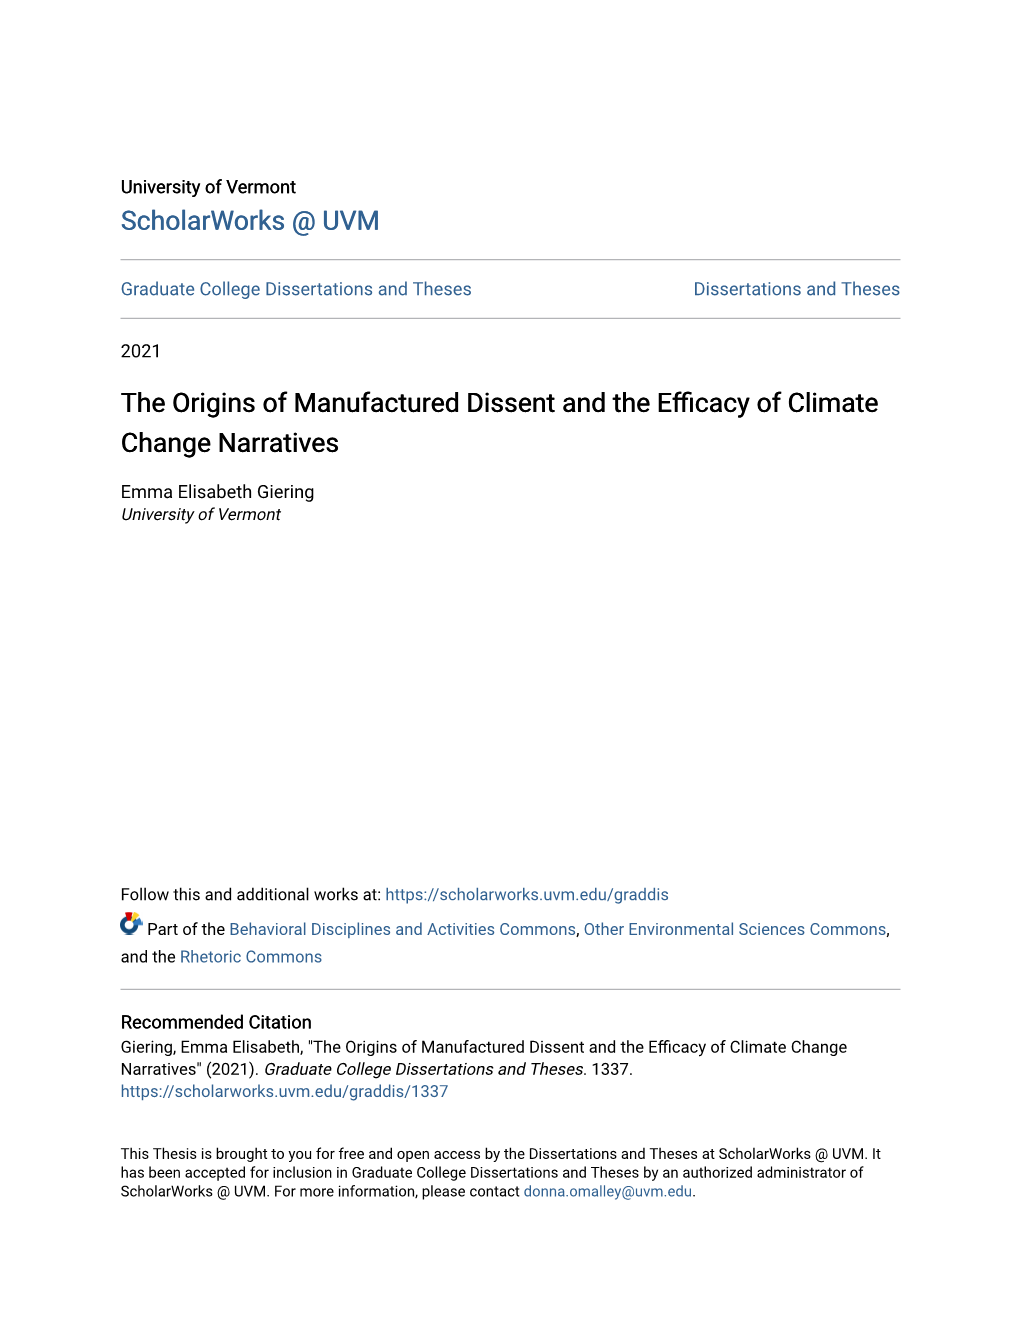 The Origins of Manufactured Dissent and the Efficacy of Climate Change Narratives